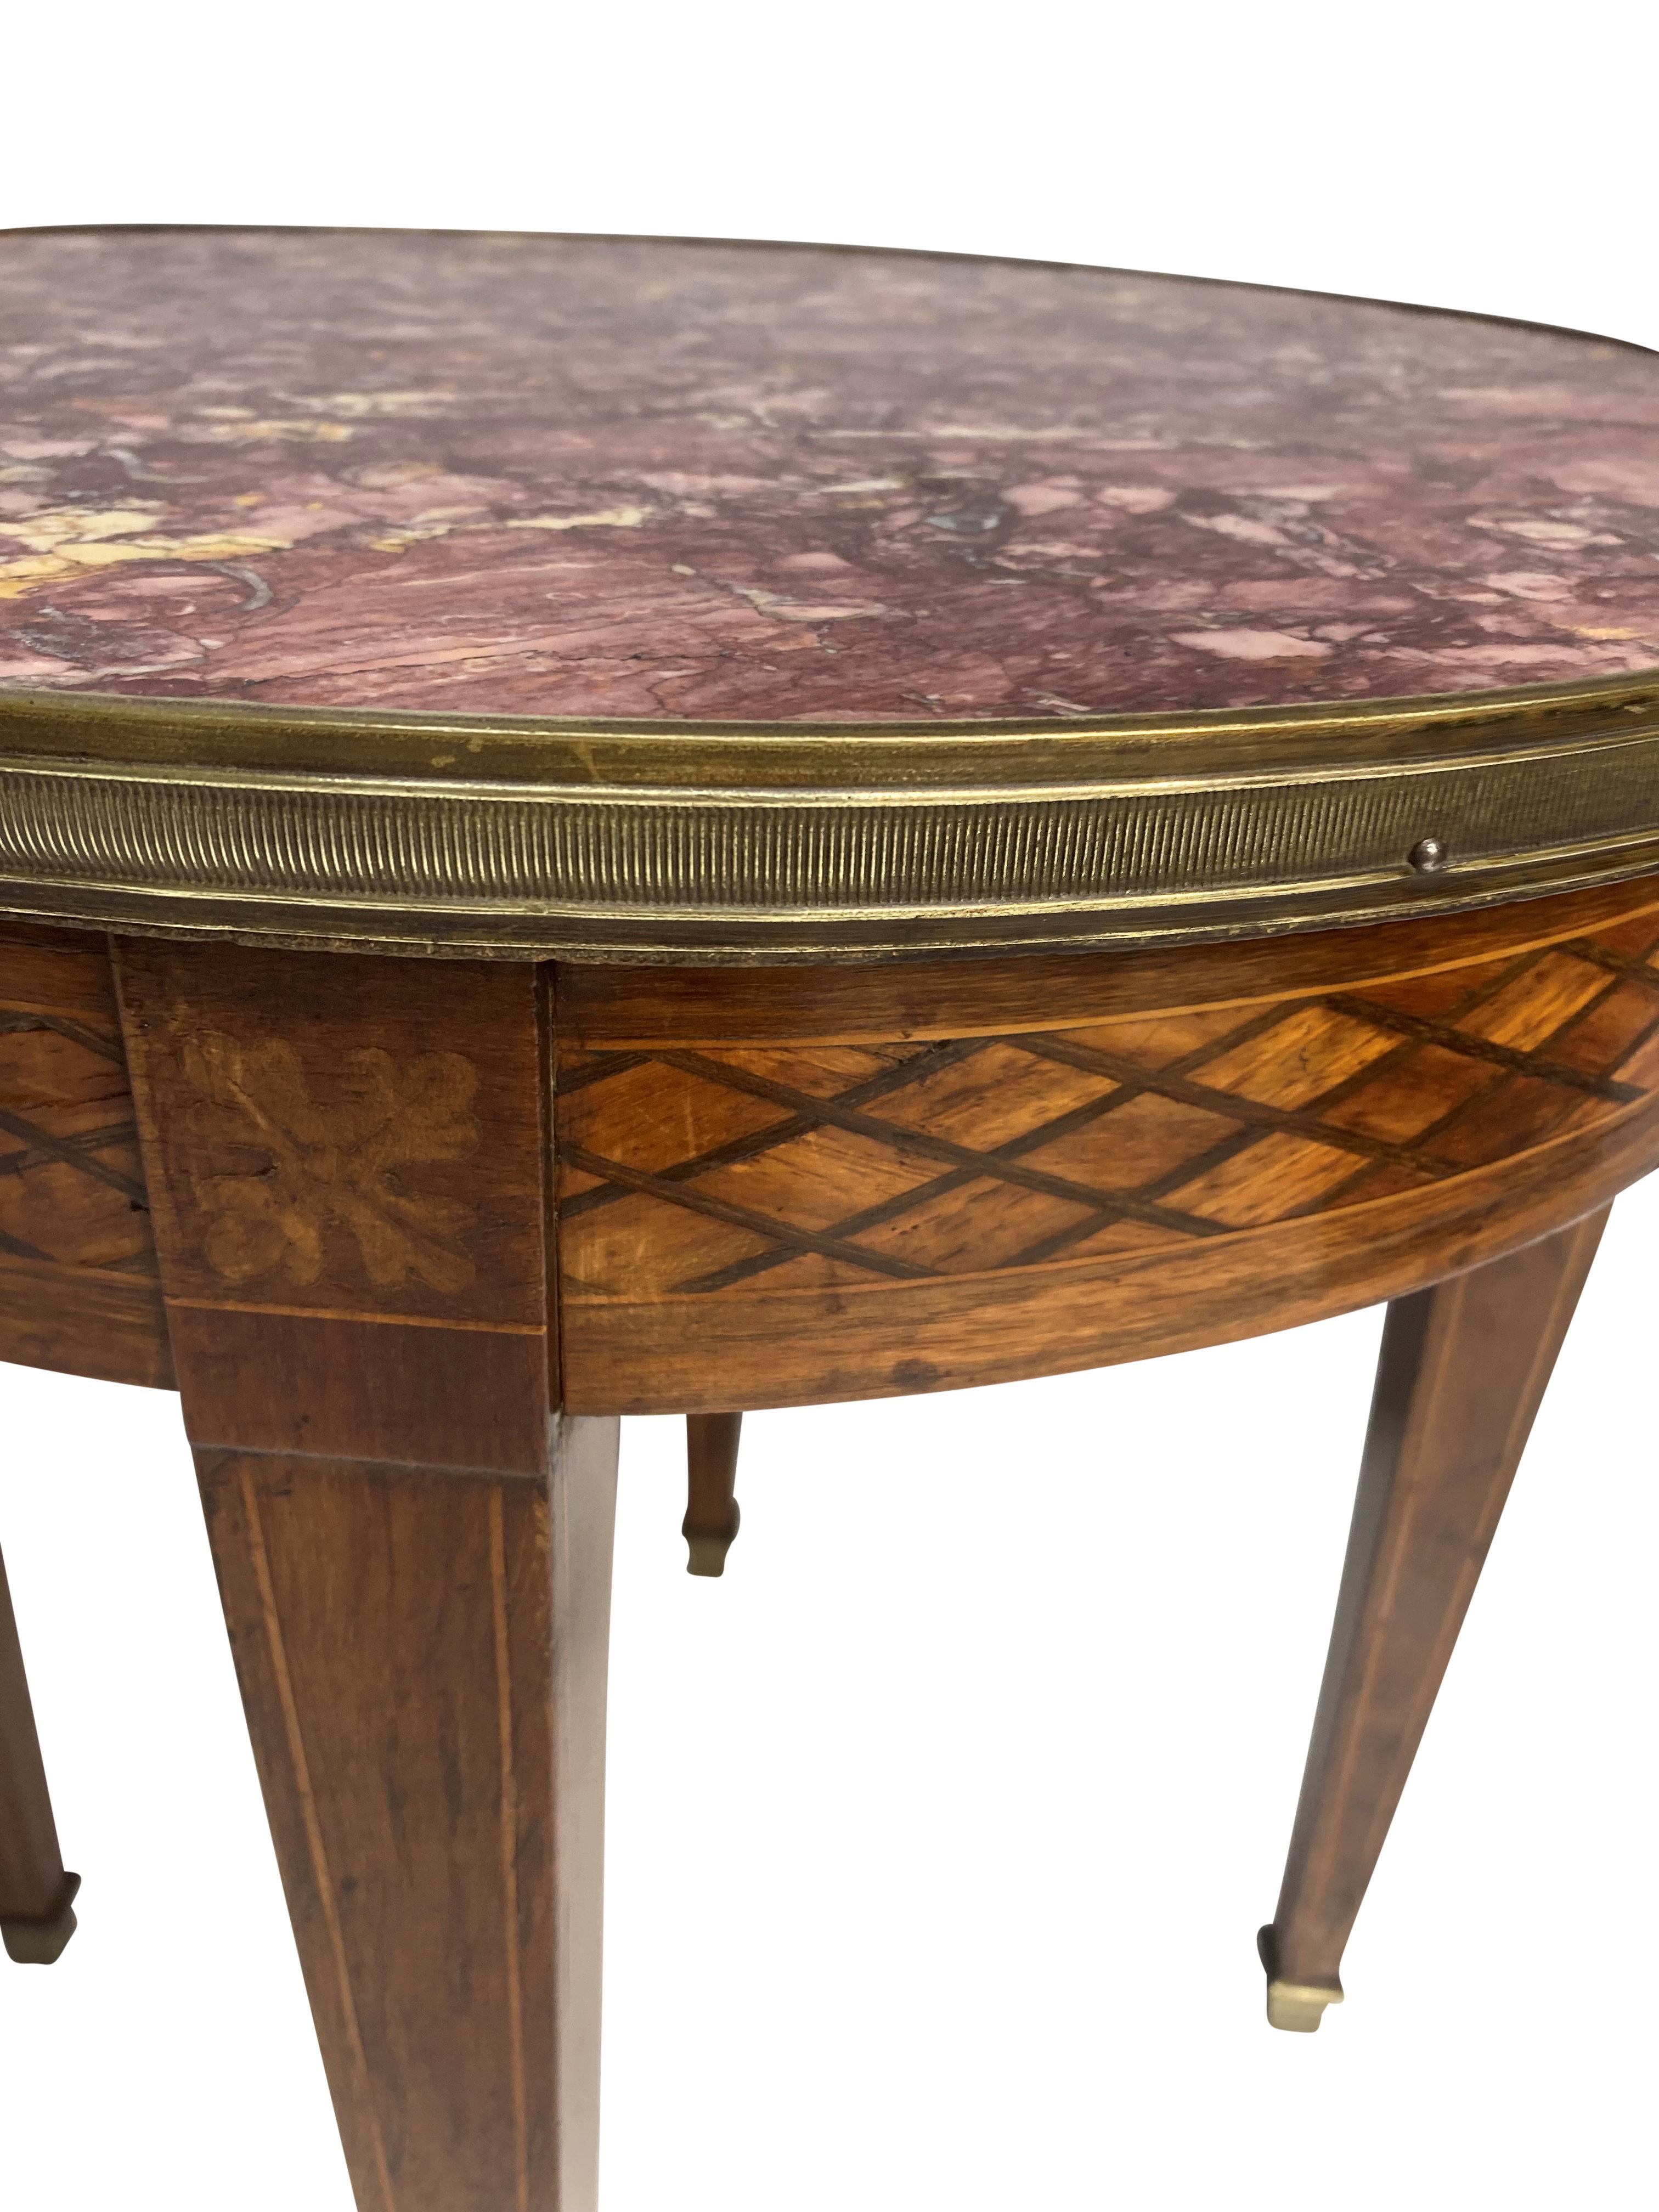 A small French XIX Century gueridon table in marquetry, with brass sabot feet and a gallery, surrounding a violette marble top.